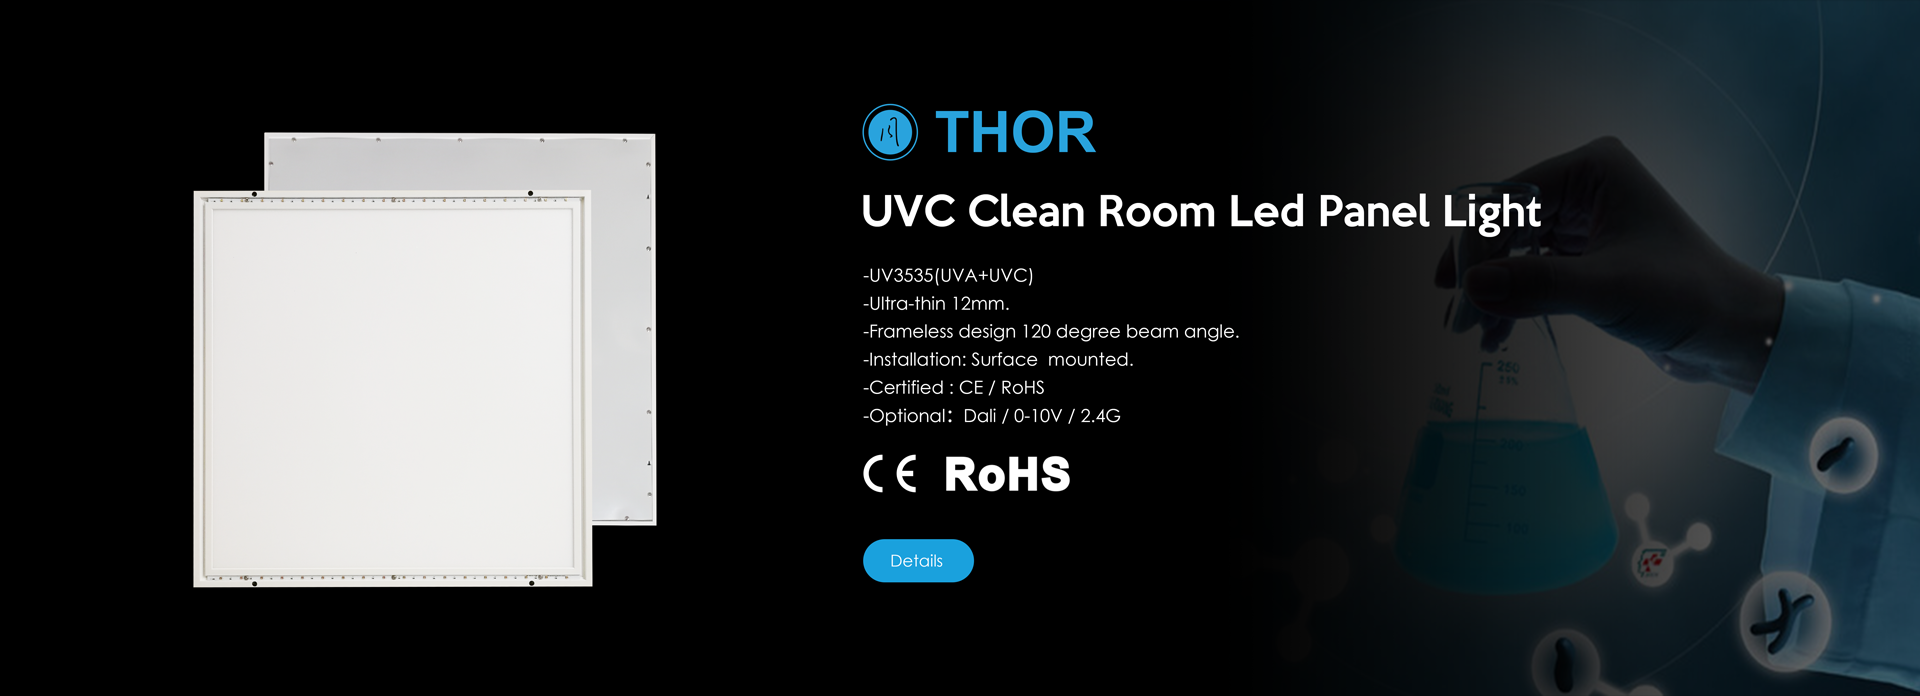 UVC Clean Room Commercial Lighting